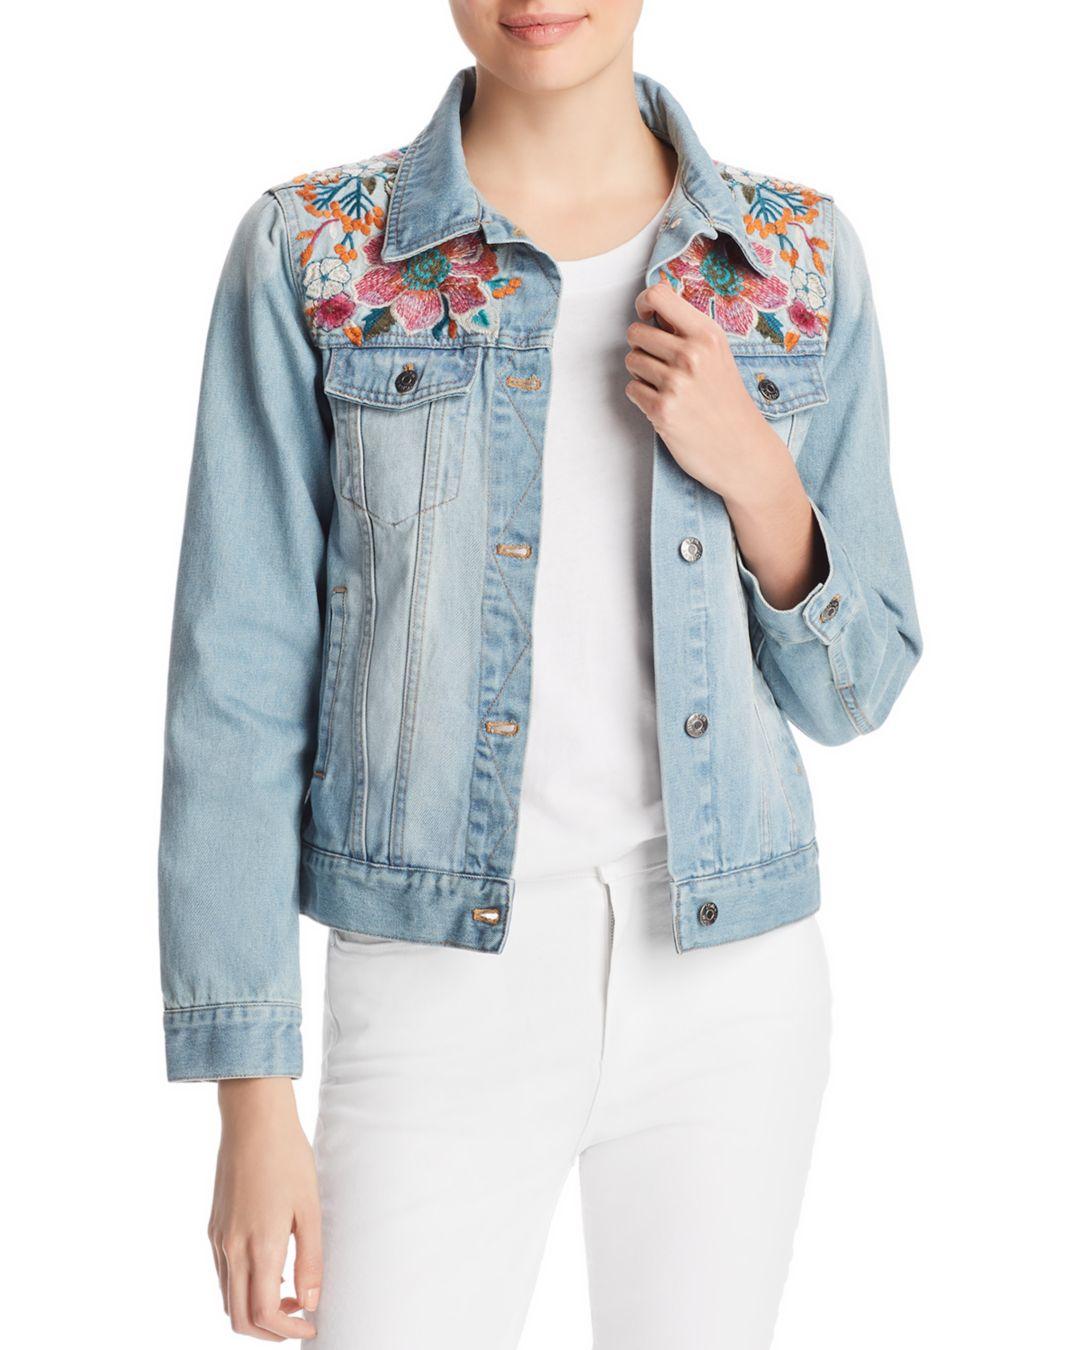 Johnny Was Nena Floral - Embroidered Denim Jacket in Blue - Lyst